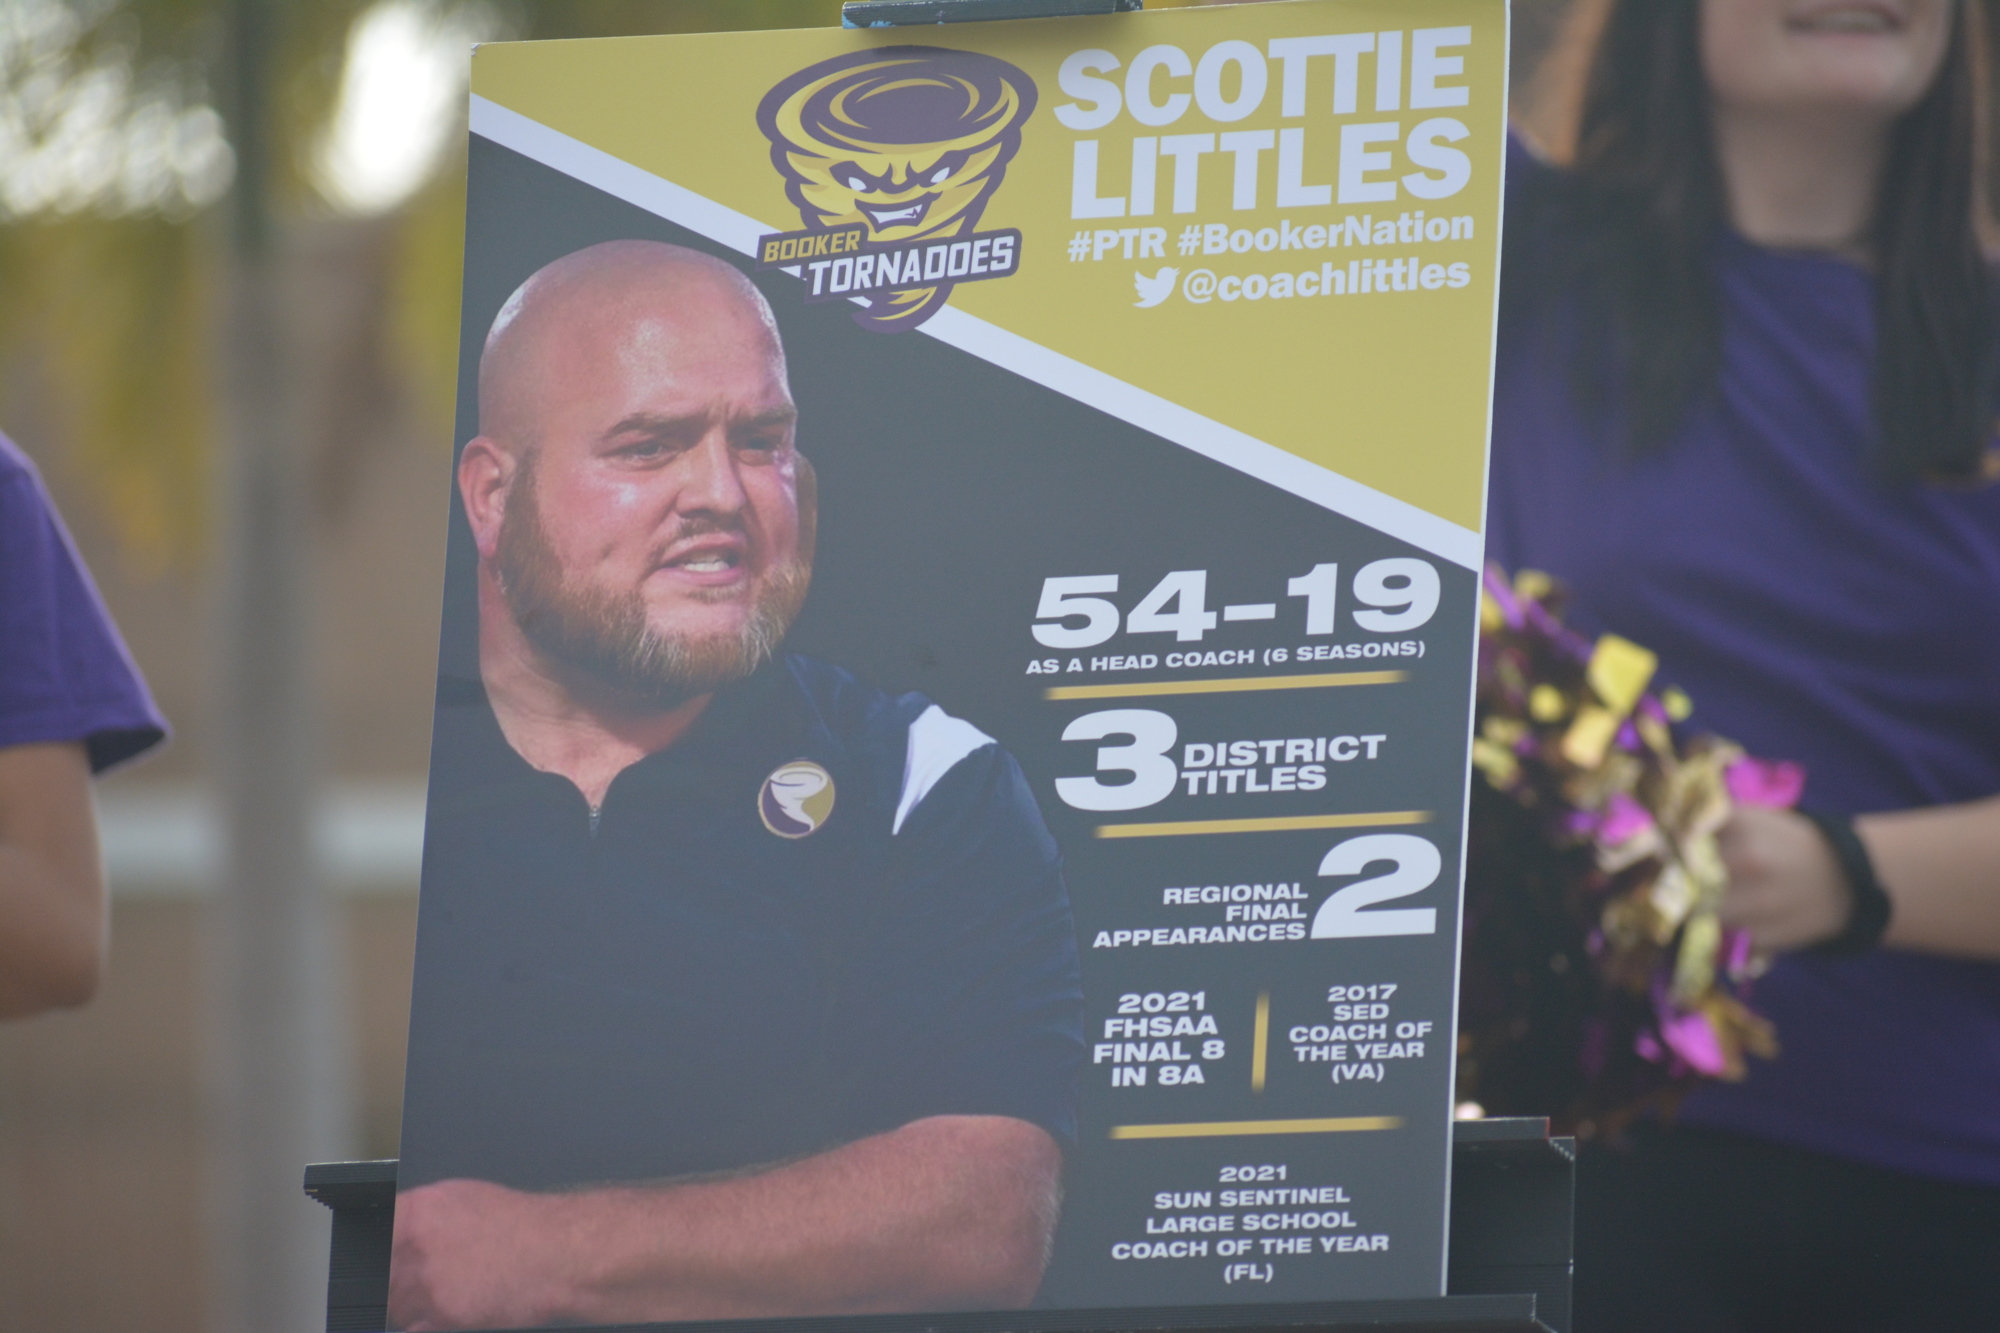 A poster celebrating Scottie Littles' accomplishments was present at Littles' introductory press conference.